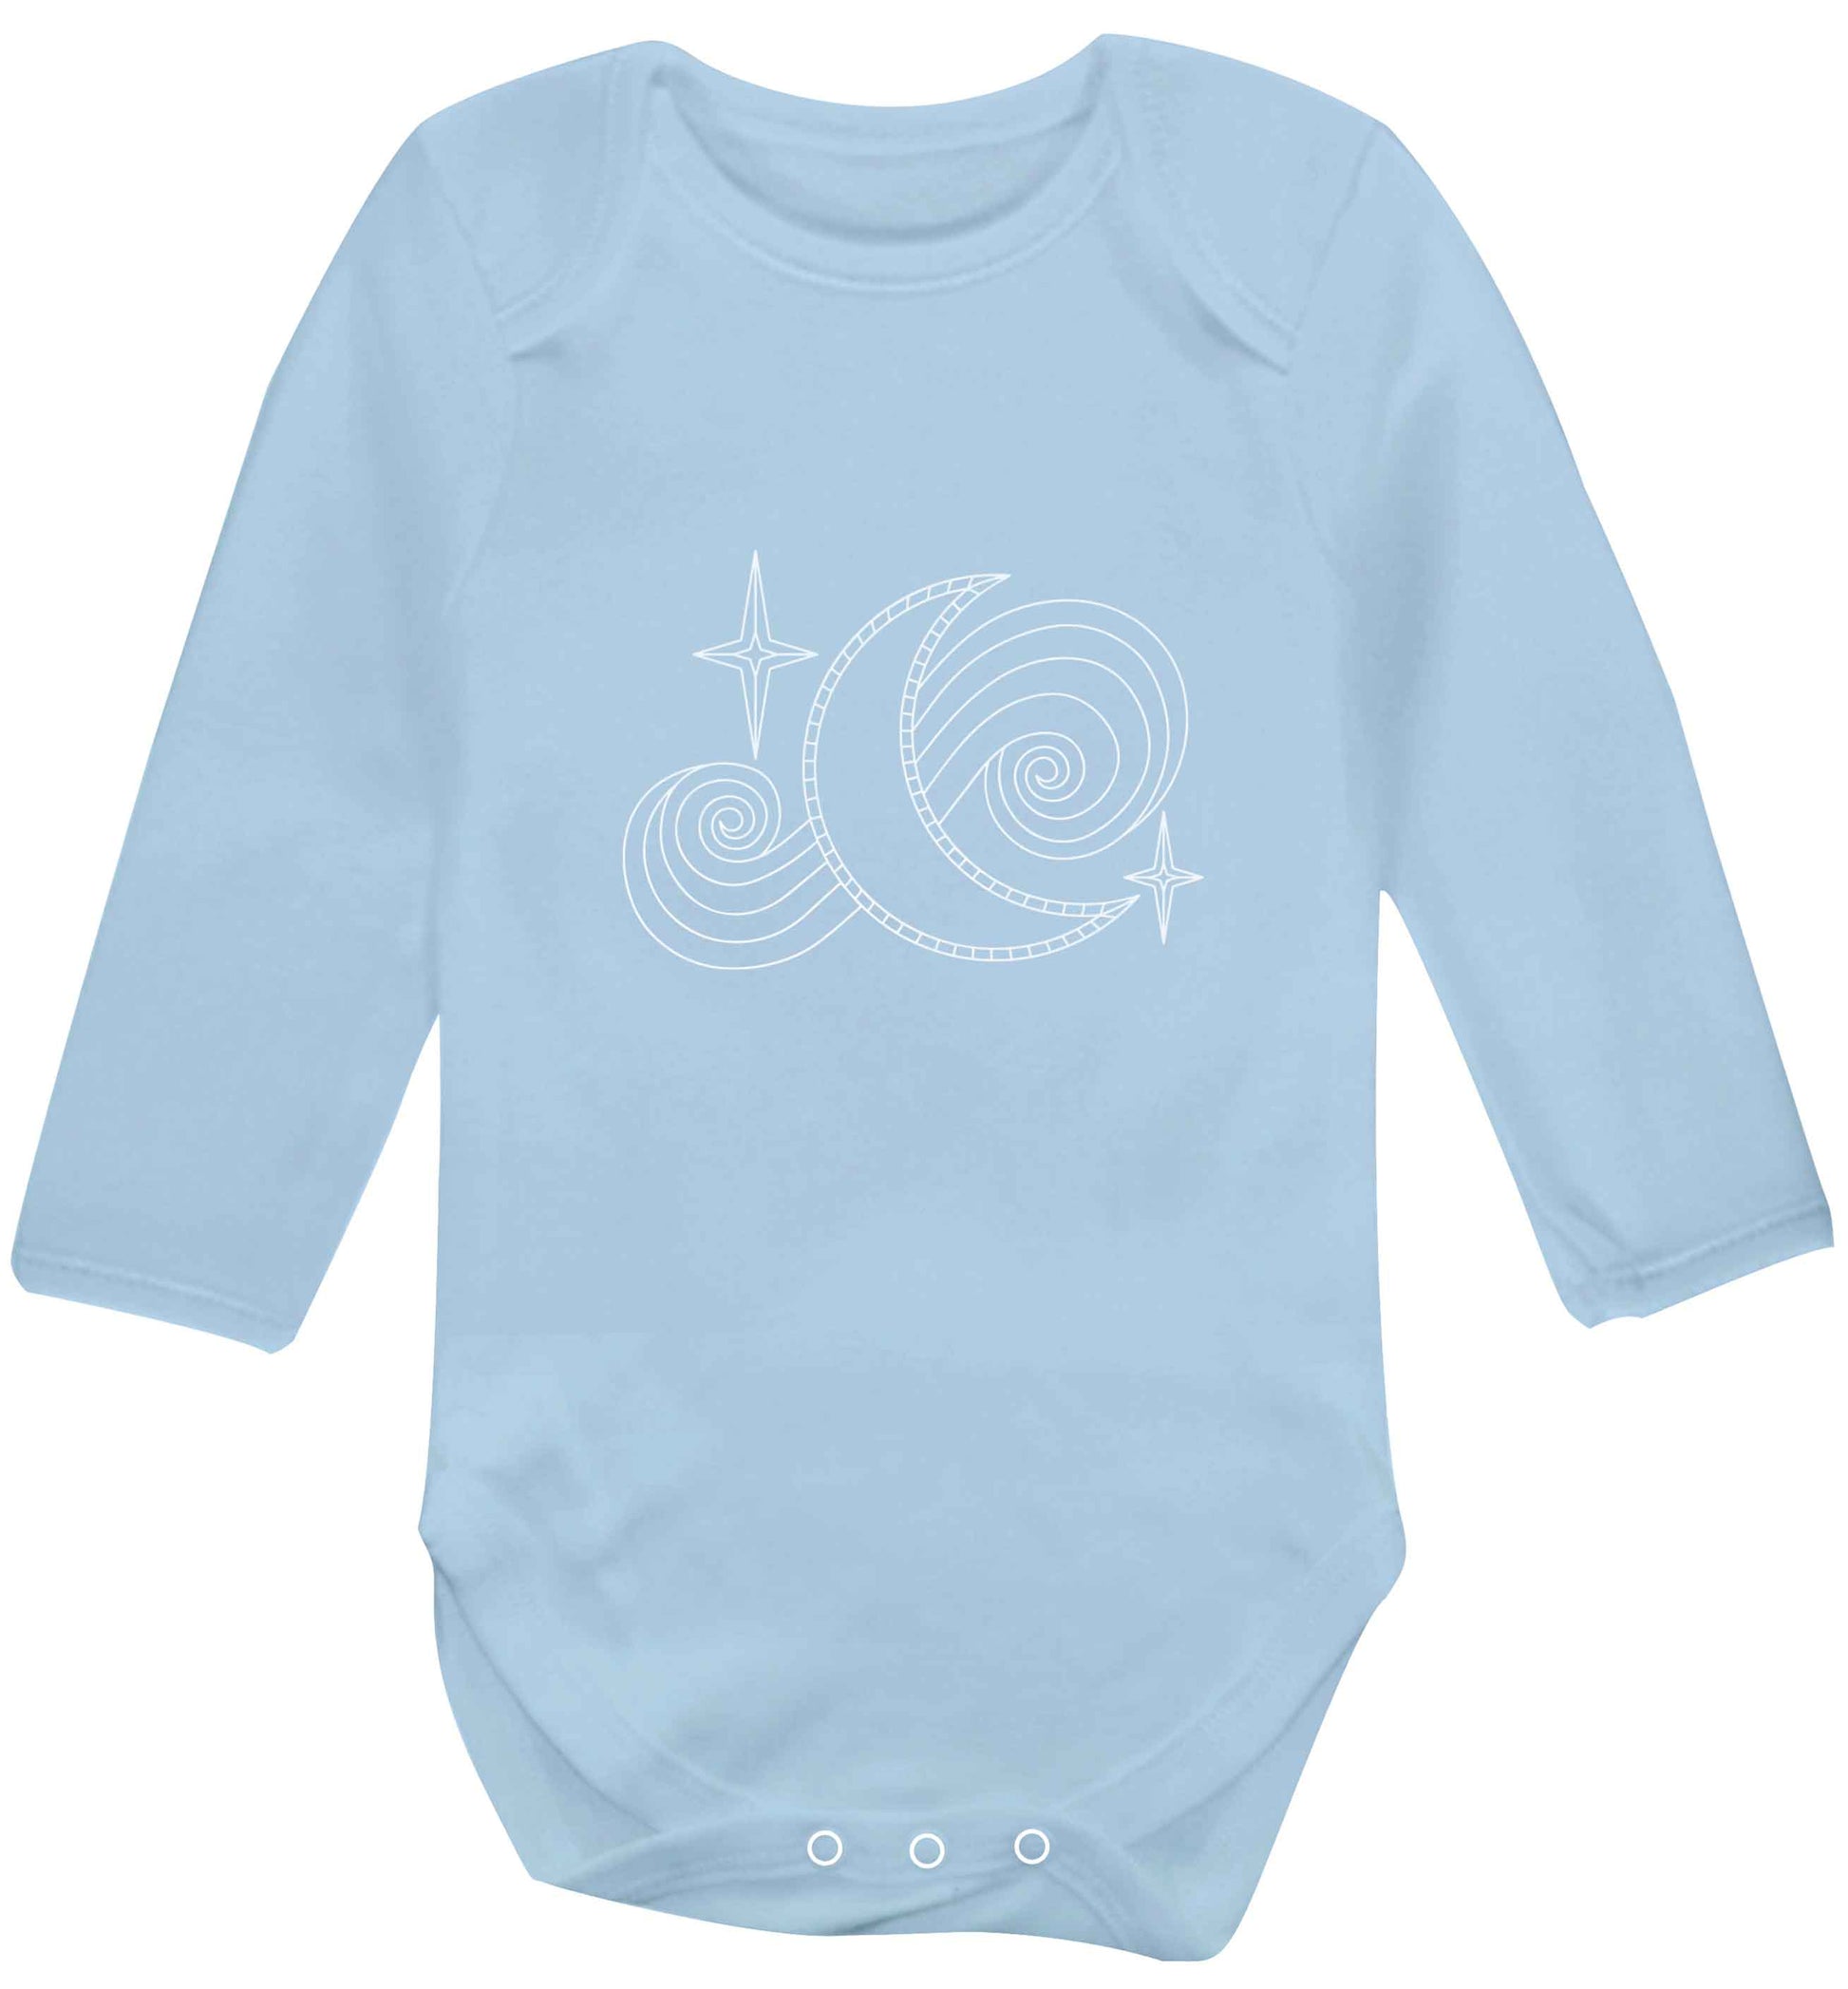 Moon and stars illustration baby vest long sleeved pale blue 6-12 months